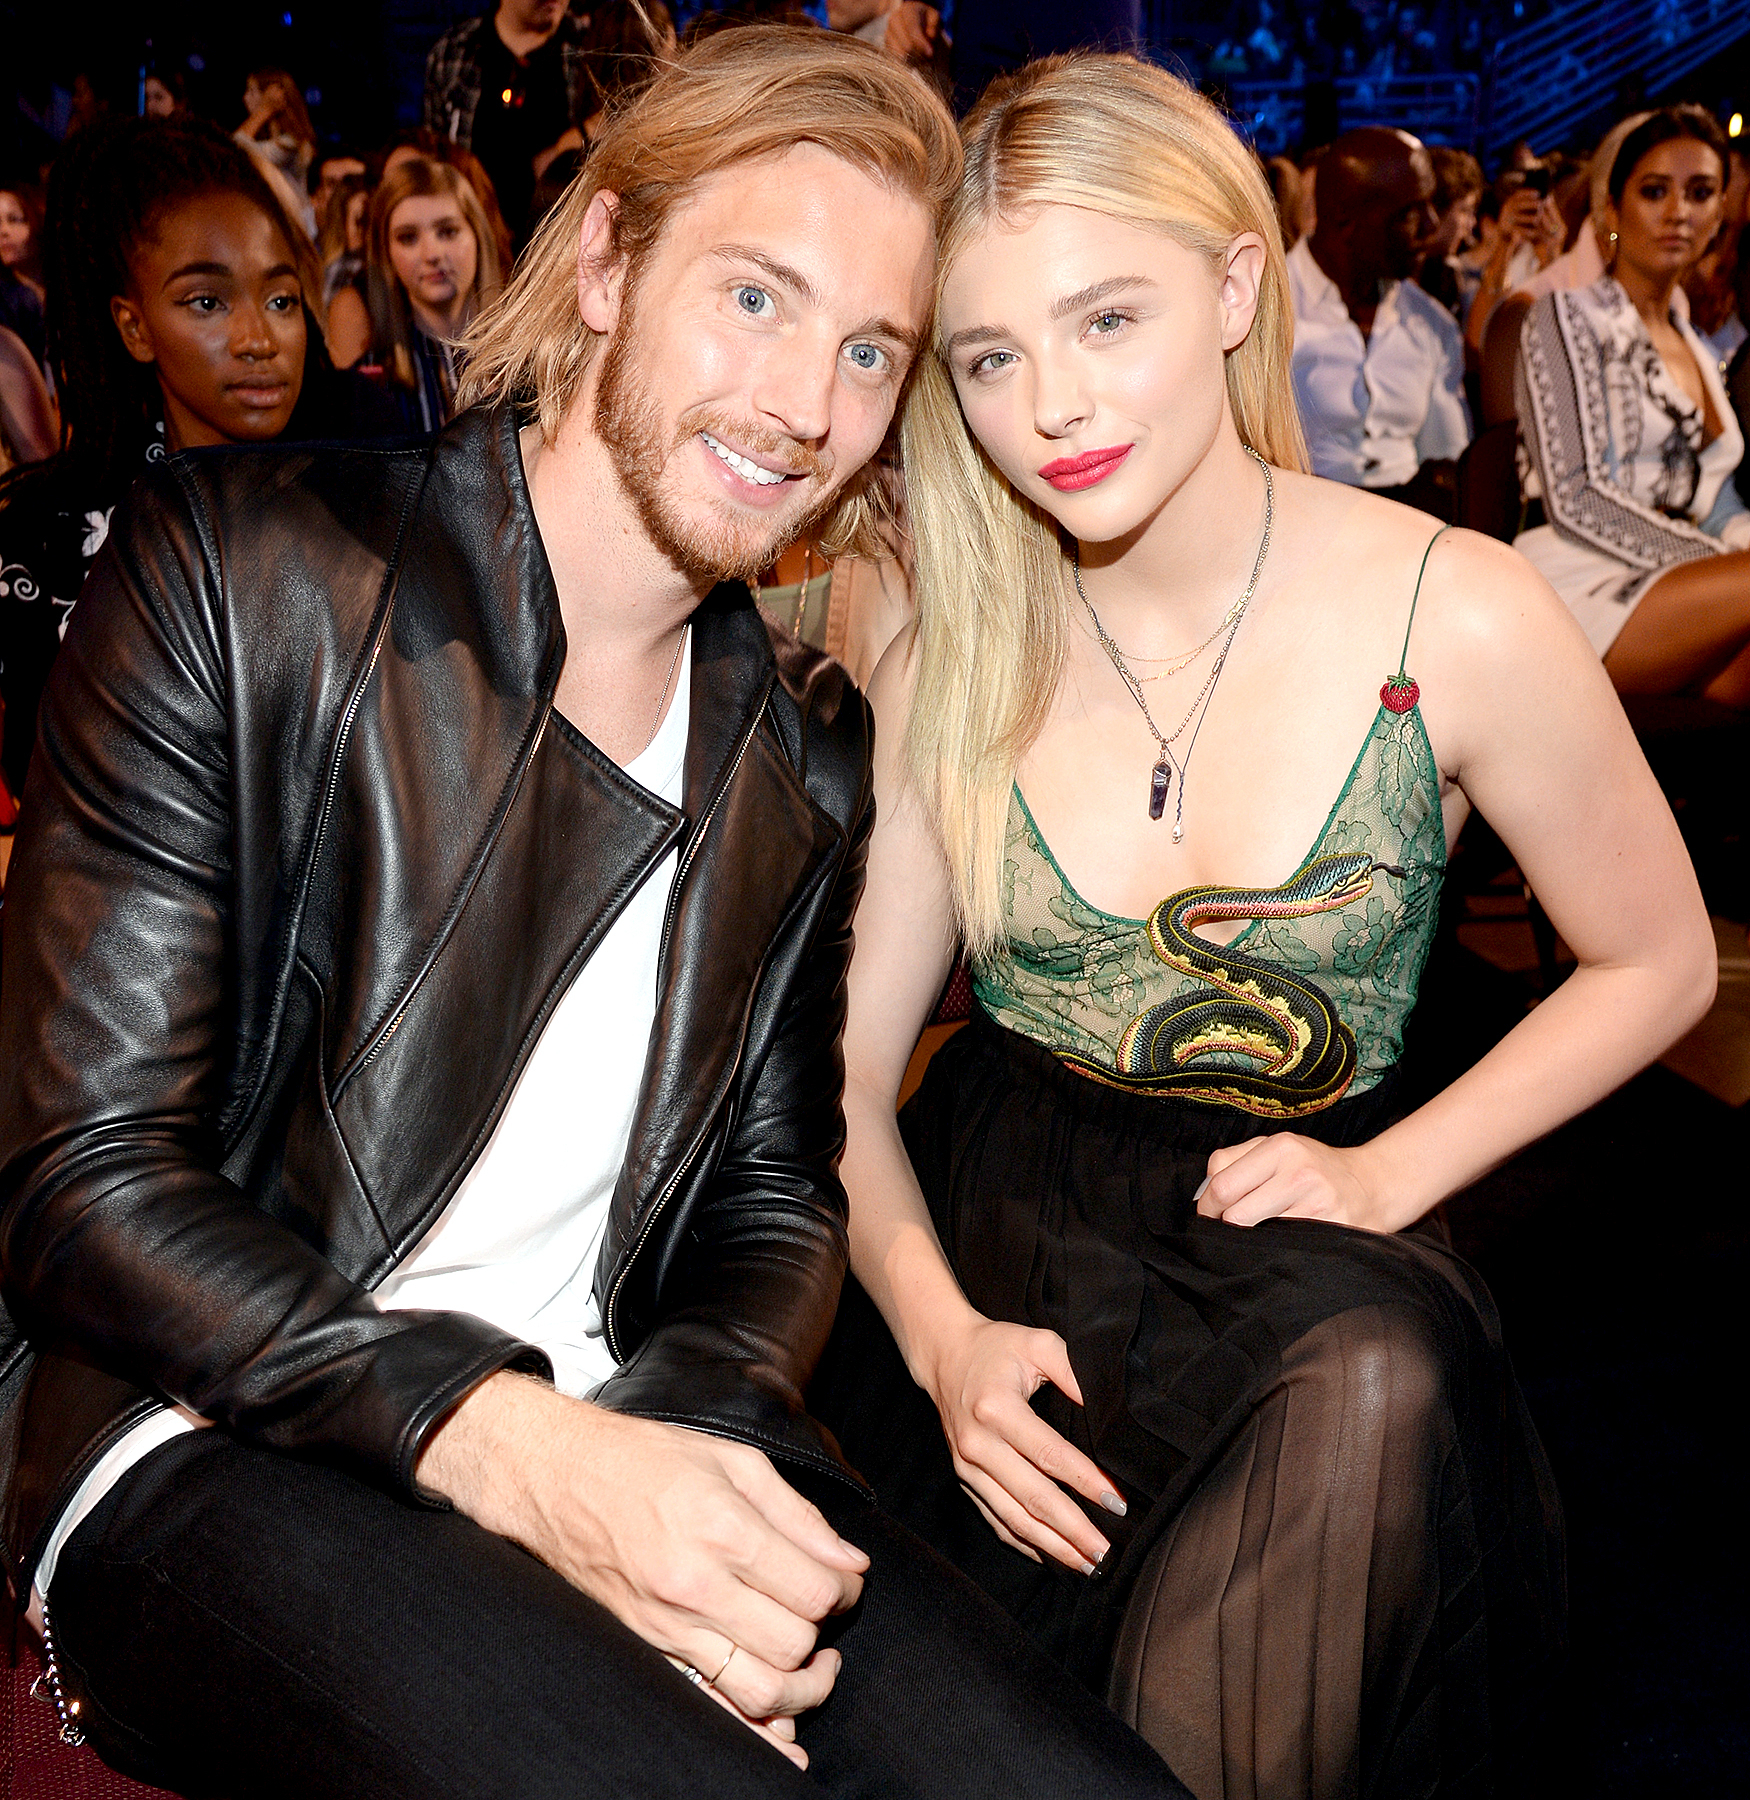 Chloe Grace Moretz Is Dating Brooklyn Beckham – The Hollywood Reporter